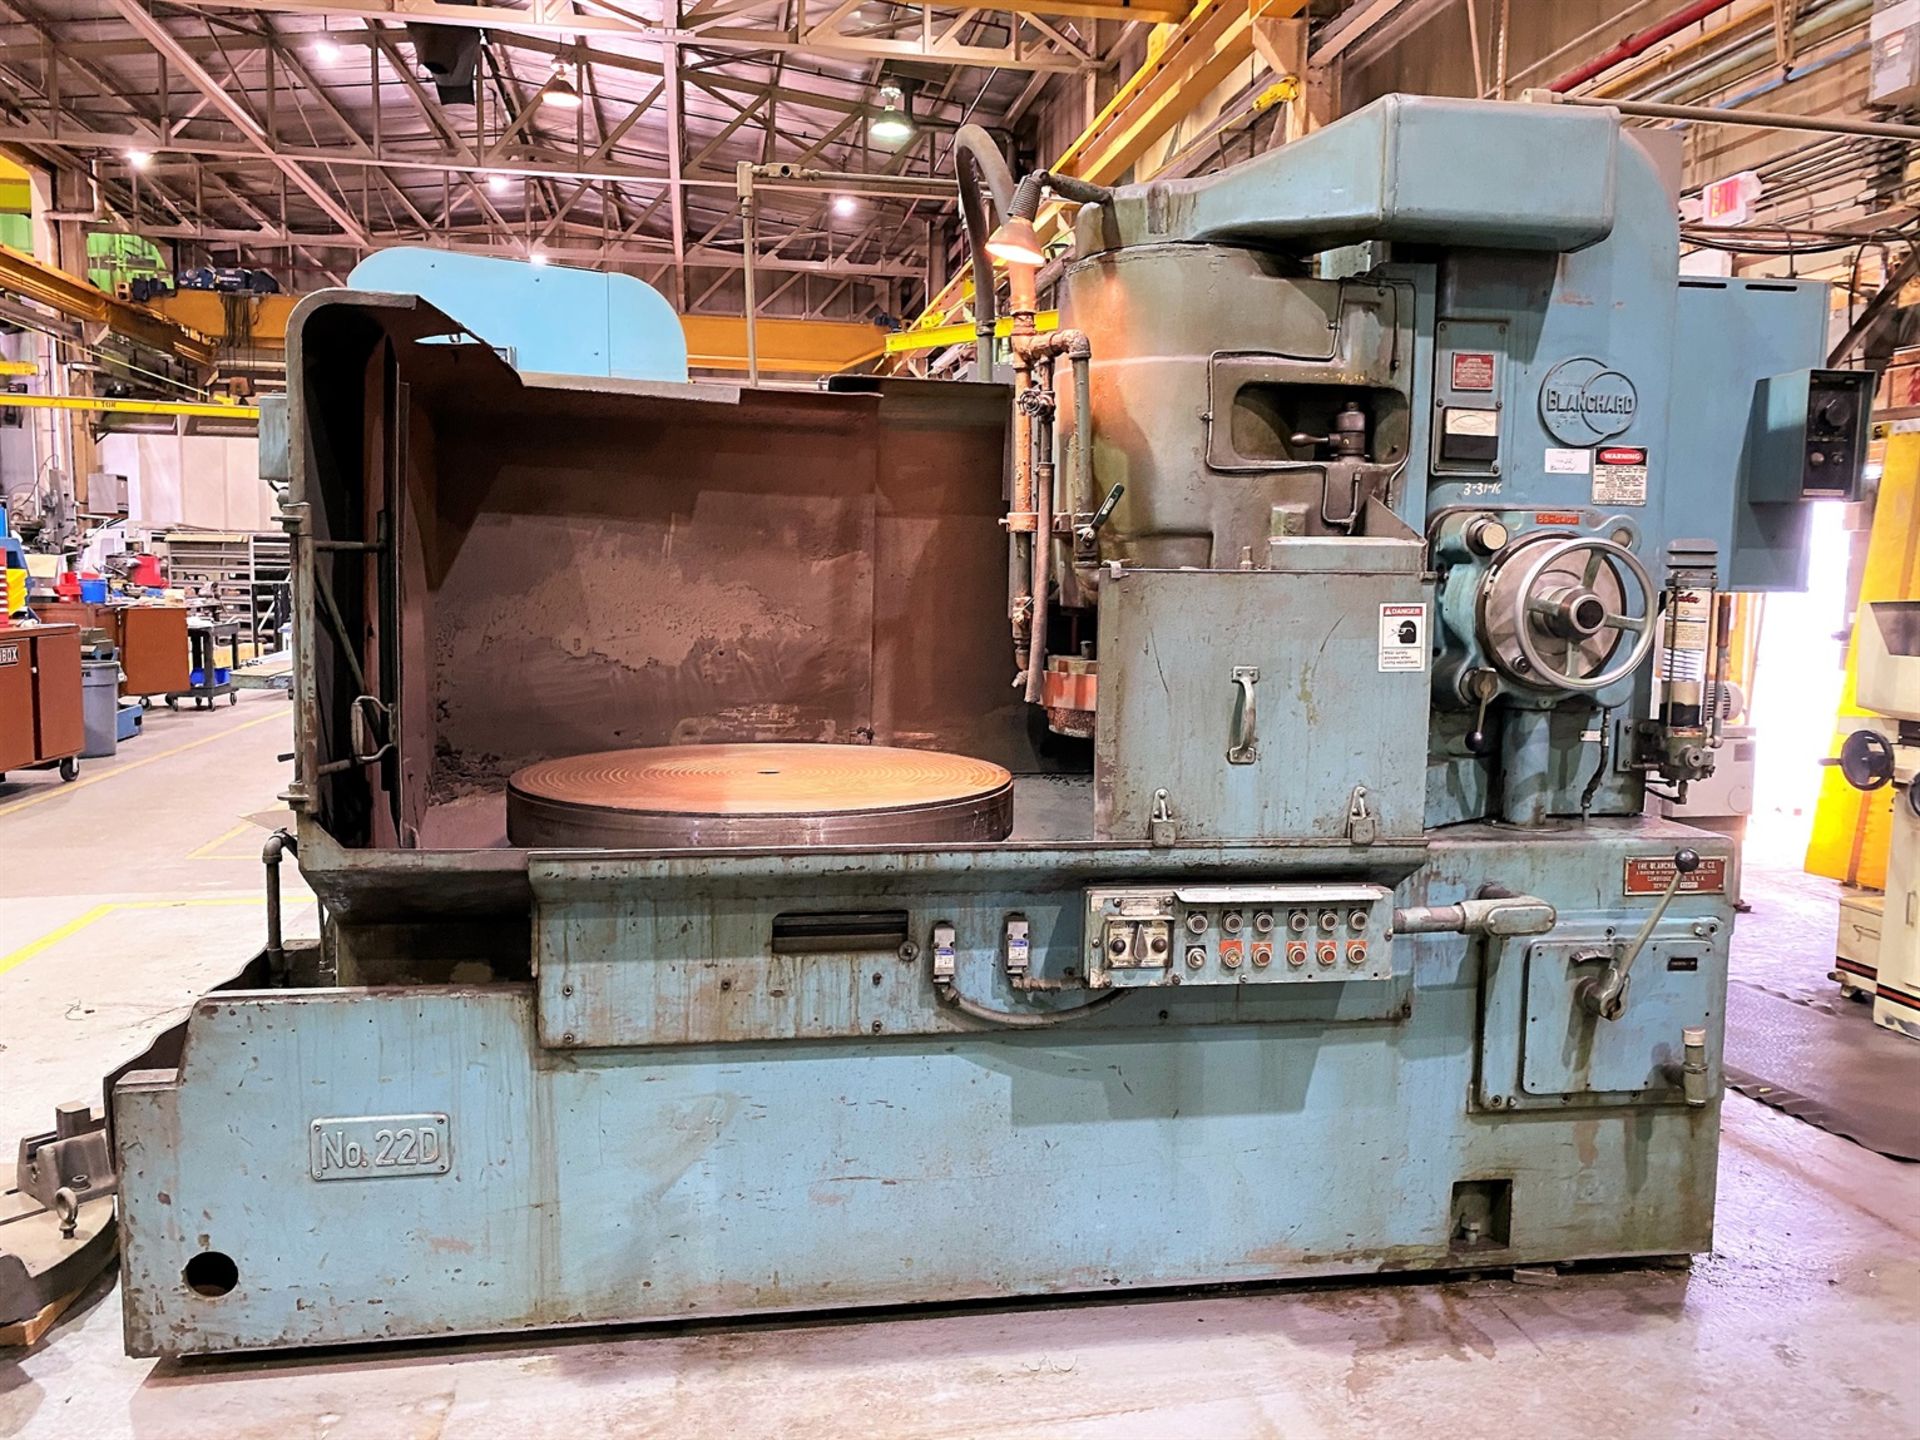 Blanchard 22D Rotary Surface Grinder, s/n 13322, 42" Magnetic Chuck, 1/2" Chuck Life, 16” Under